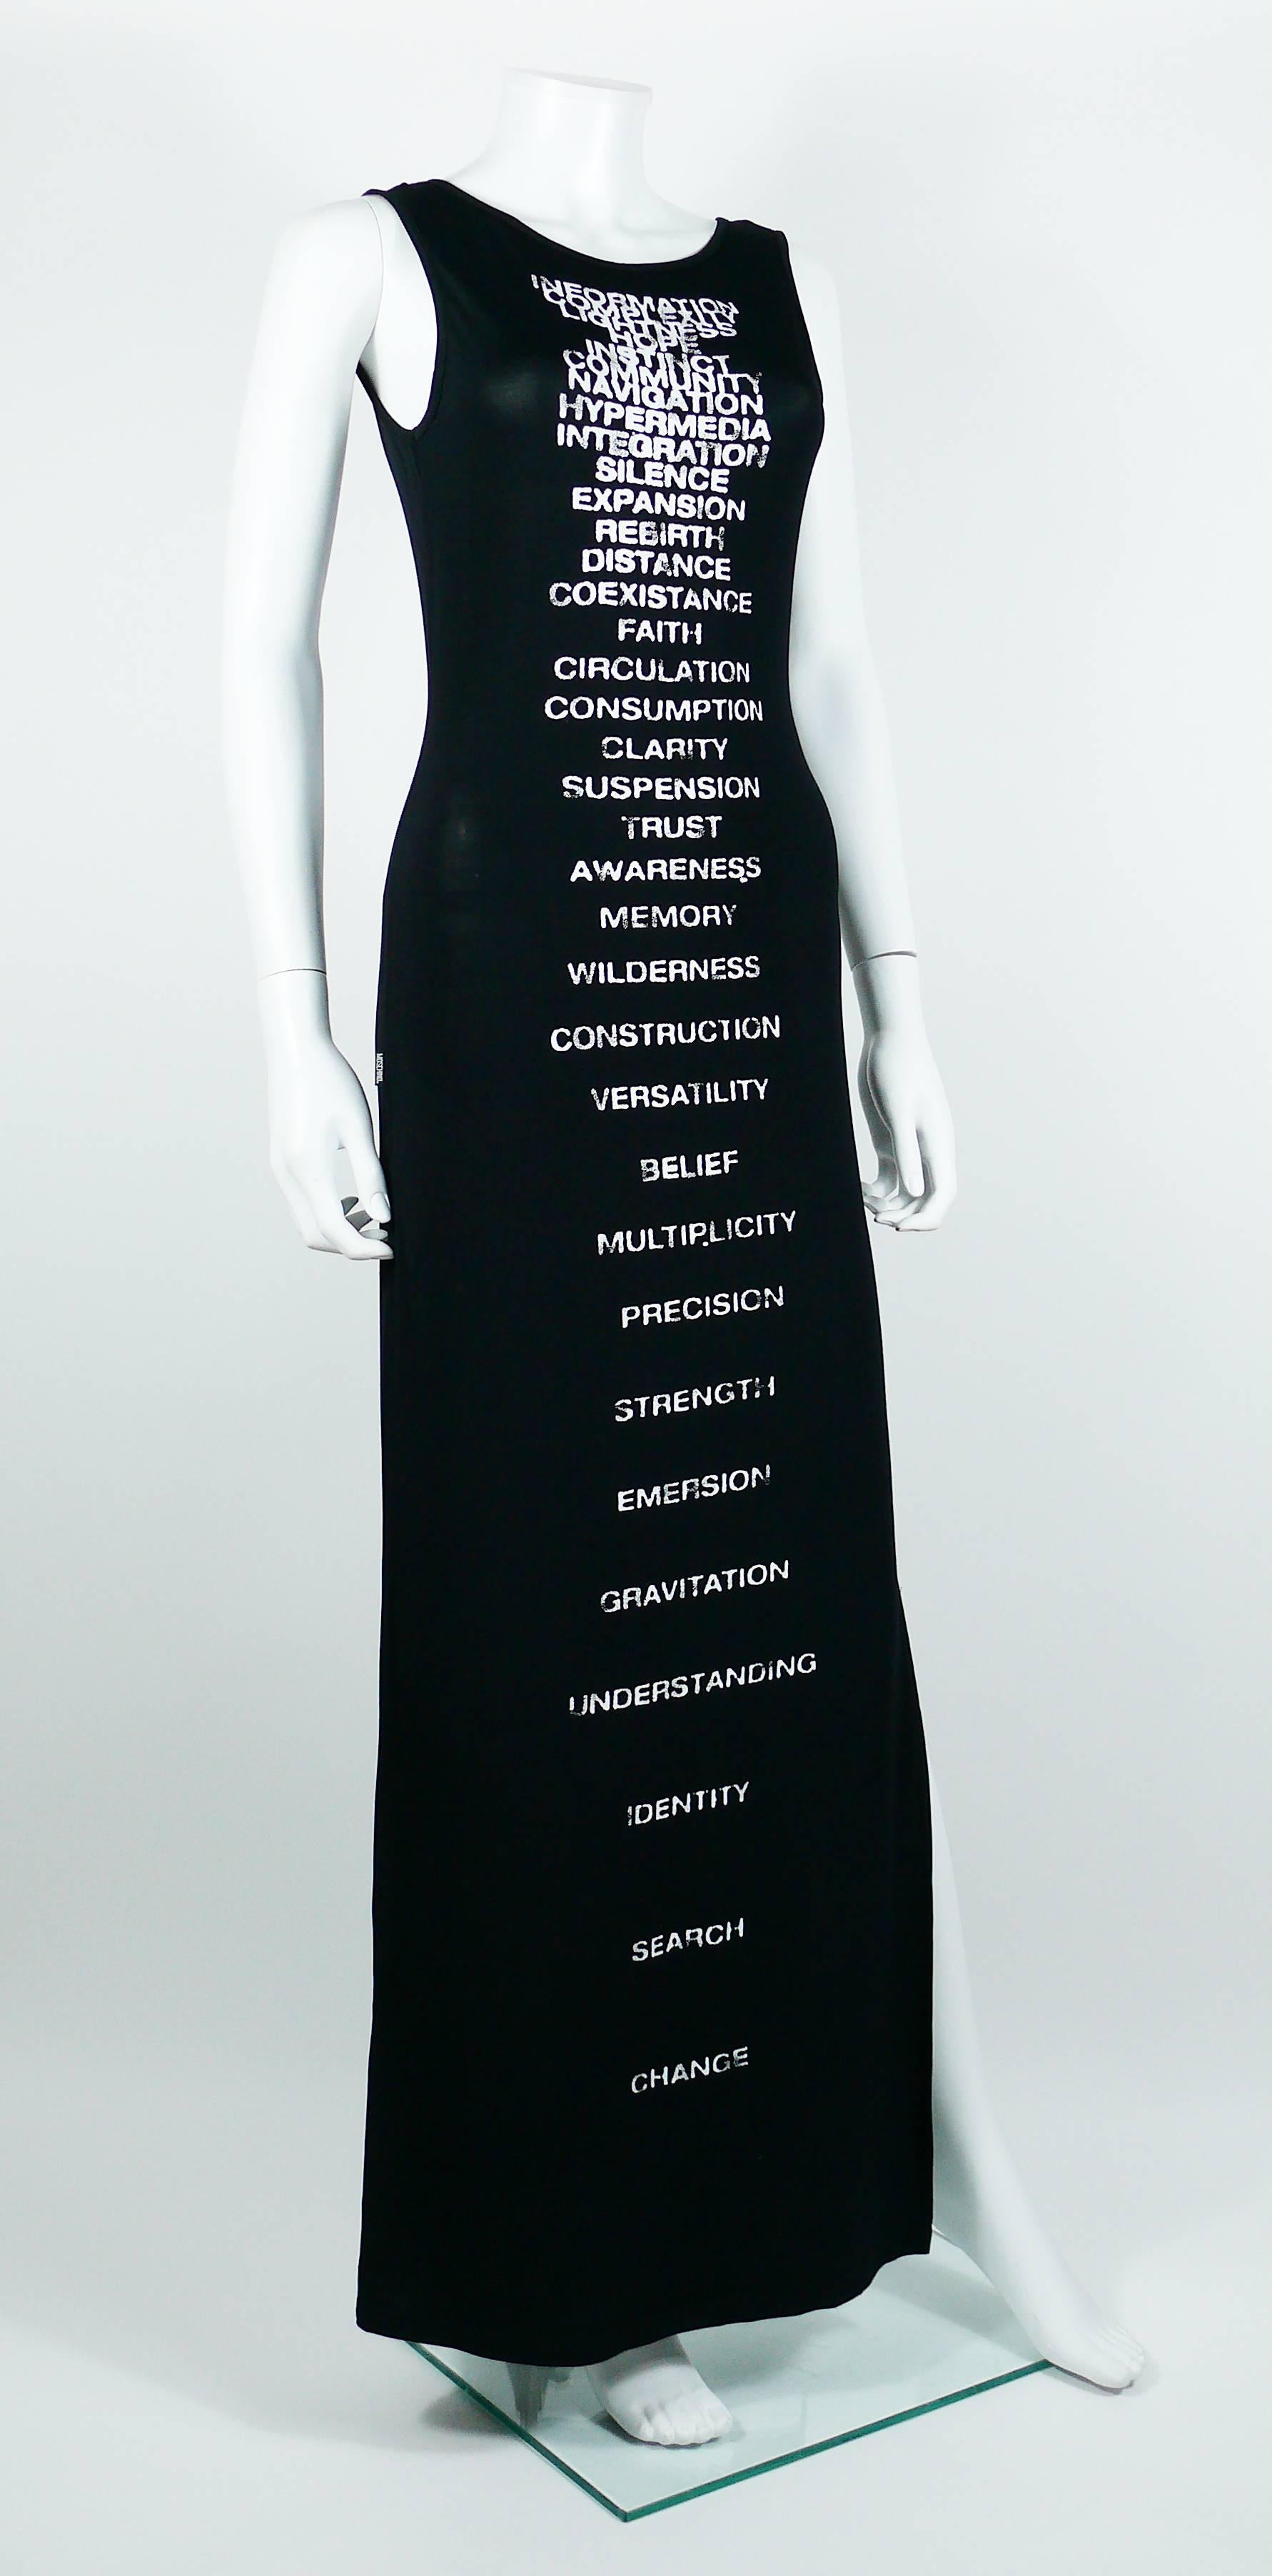 MOSCHINO vintage black maxi dress with all over text.

This dress features :
- Black hugging synthetic with spandex material.
- White print distressed lettering with words 